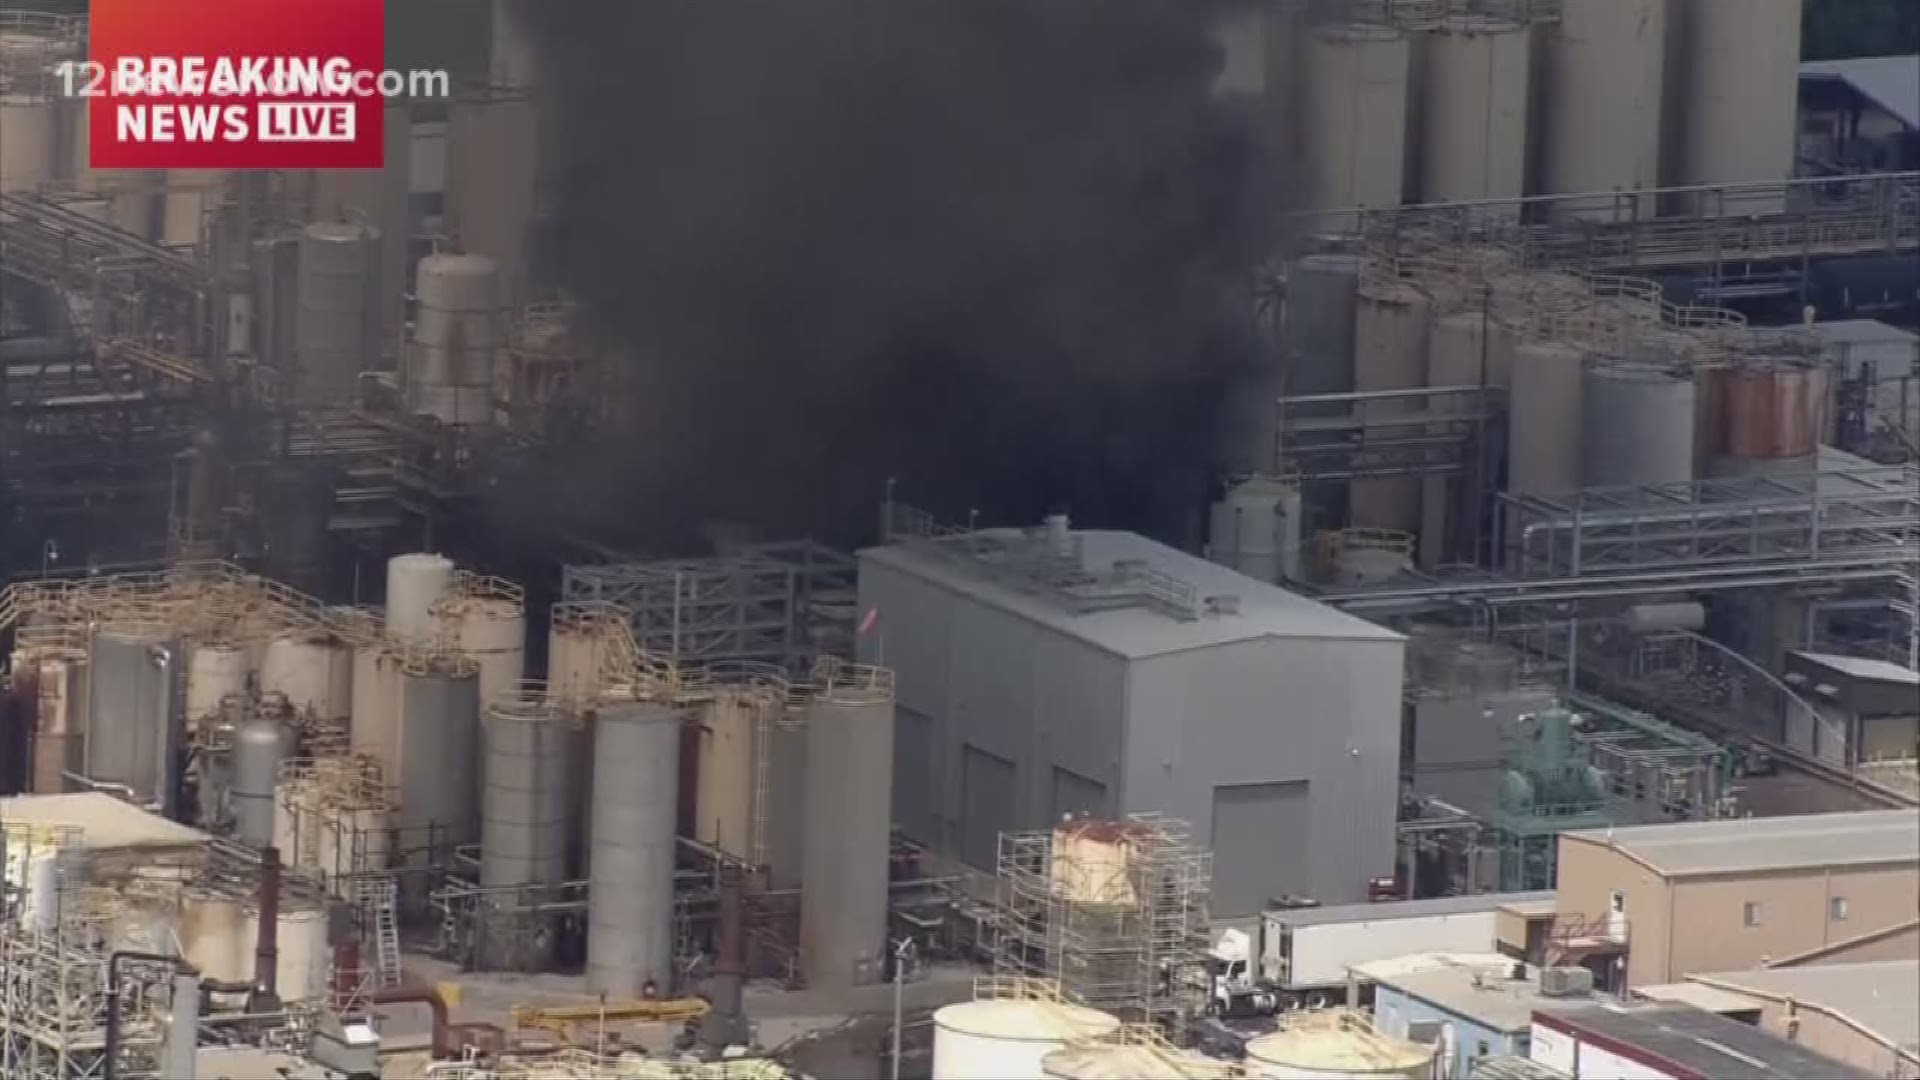 At least one dead, two injured in KMCO chemical plant explosion in Crosby